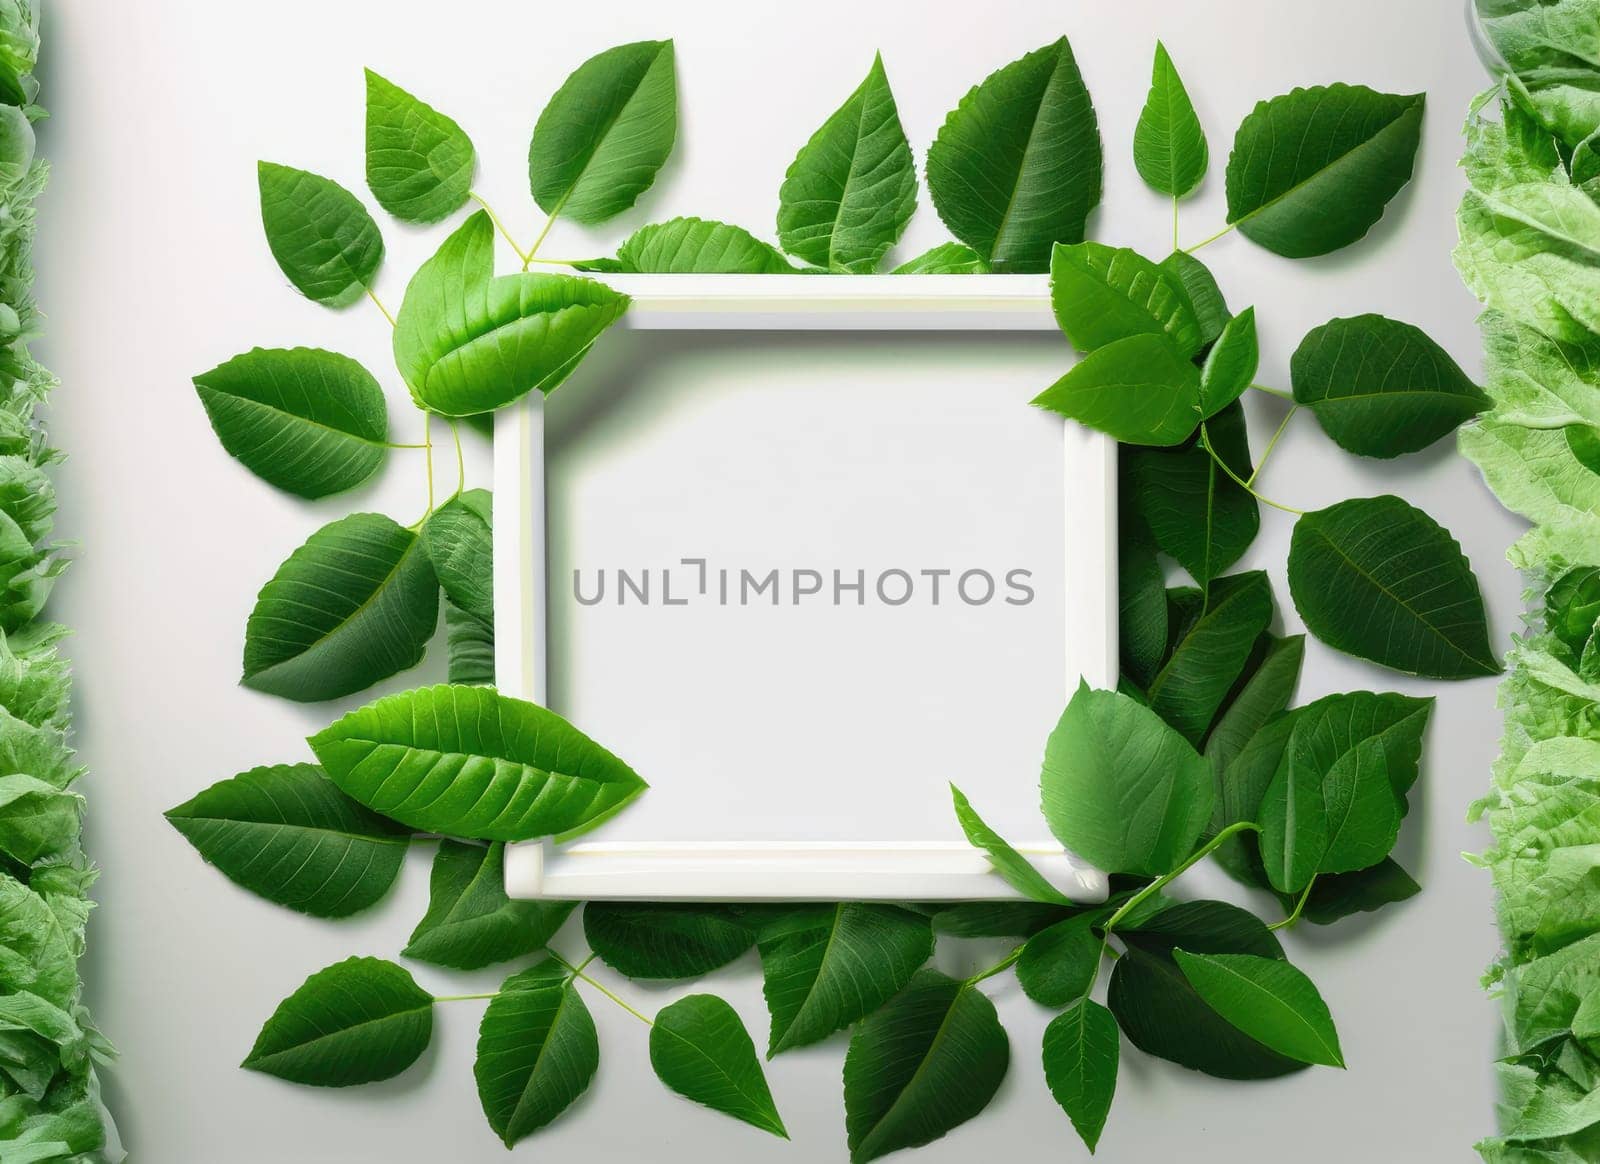 creative layout, green leaves with white square frame.